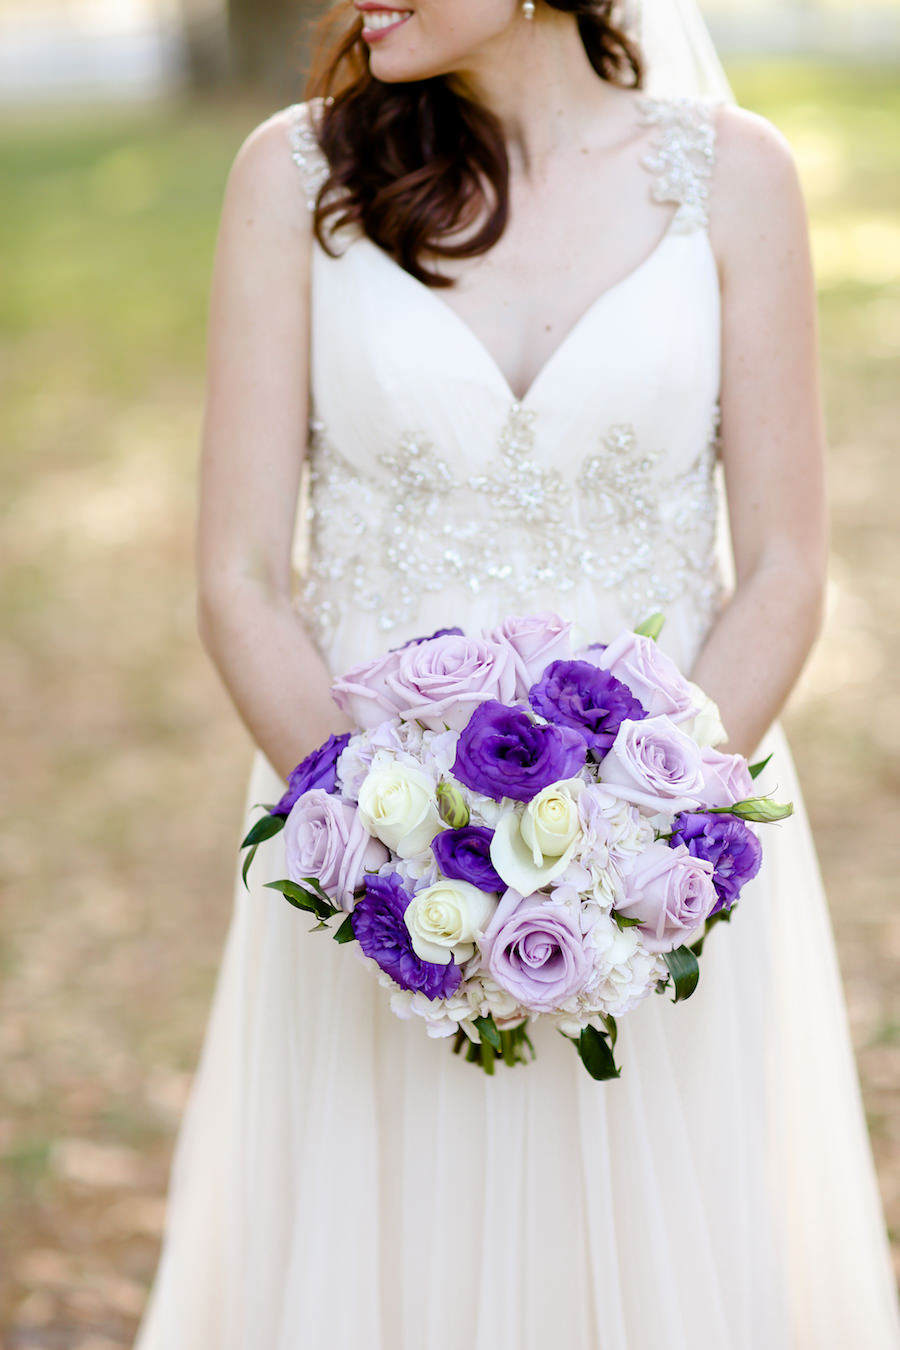 Outdoor Bridal Wedding Portrait in Maggie Sottero Wedding Dress at Tampa Bay Wedding Venue The Lange Farm | Purple, Ivory and Lilac Roses Bridal Wedding Bouquet | Tampa Wedding Florist Northside Florist